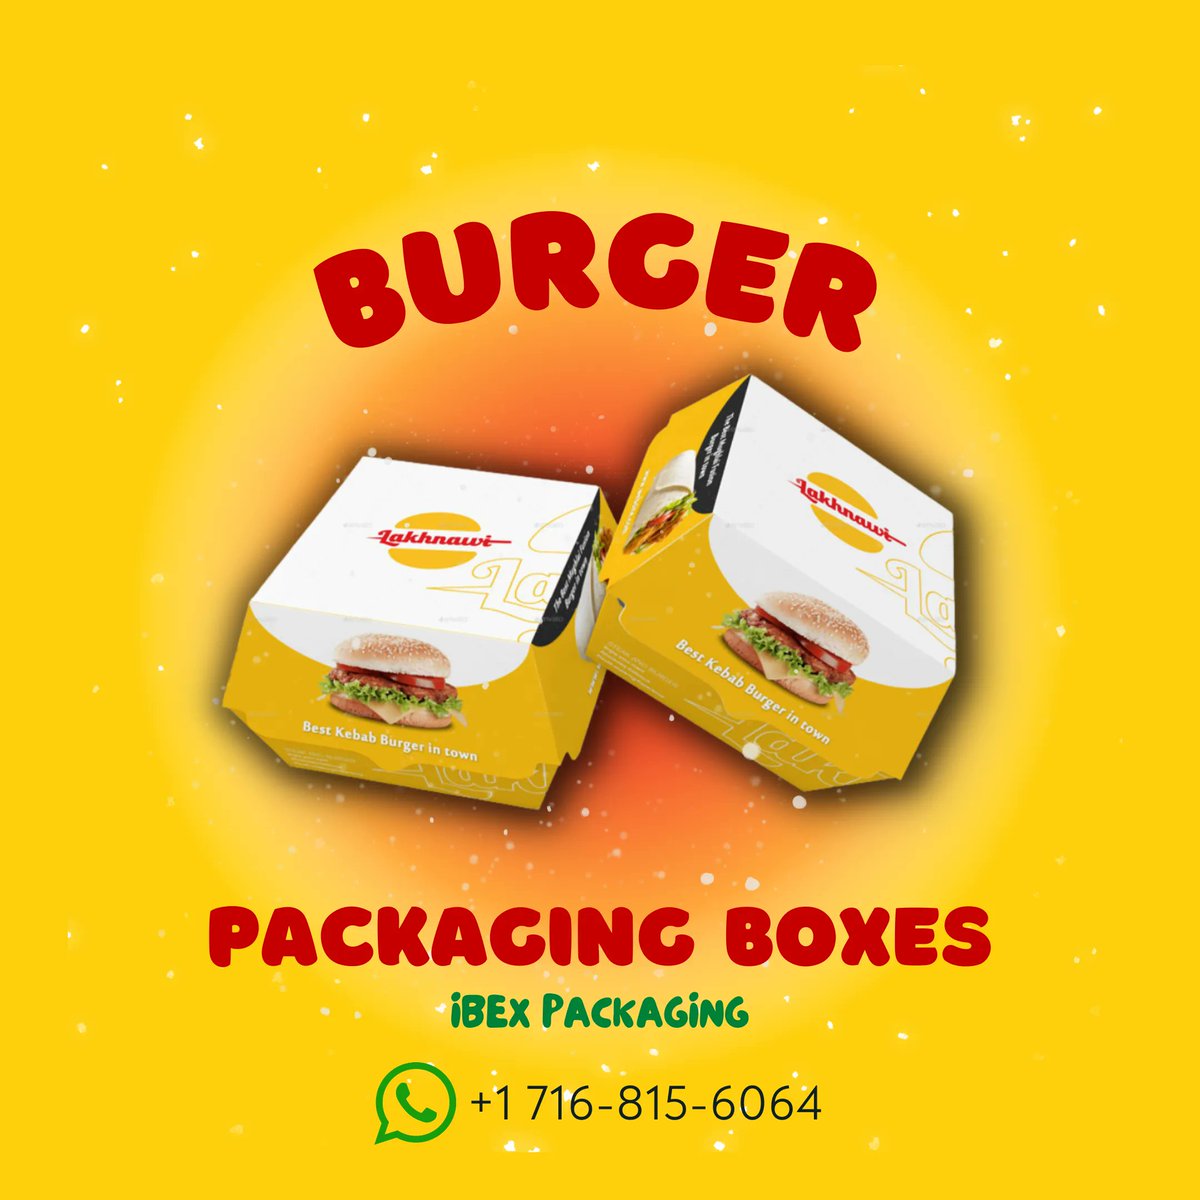 𝐁𝐔𝐑𝐆𝐄𝐑 𝐏𝐀𝐂𝐊𝐀𝐆𝐈𝐍𝐆 𝐁𝐎𝐗𝐄𝐒 🍔
CALL NOW & GET FREE 100 BOXES ON AN ORDER OF 1000 BOXES 
WHATSAPP 👉 +1 716 815 6064 

#ibexpackaging #burgerpackagingboxes #burgerboxes #burgerpackaging #burgerdeliveryboxes #deliveryboxes #takeawayboxes #disposableboxes #customboxes